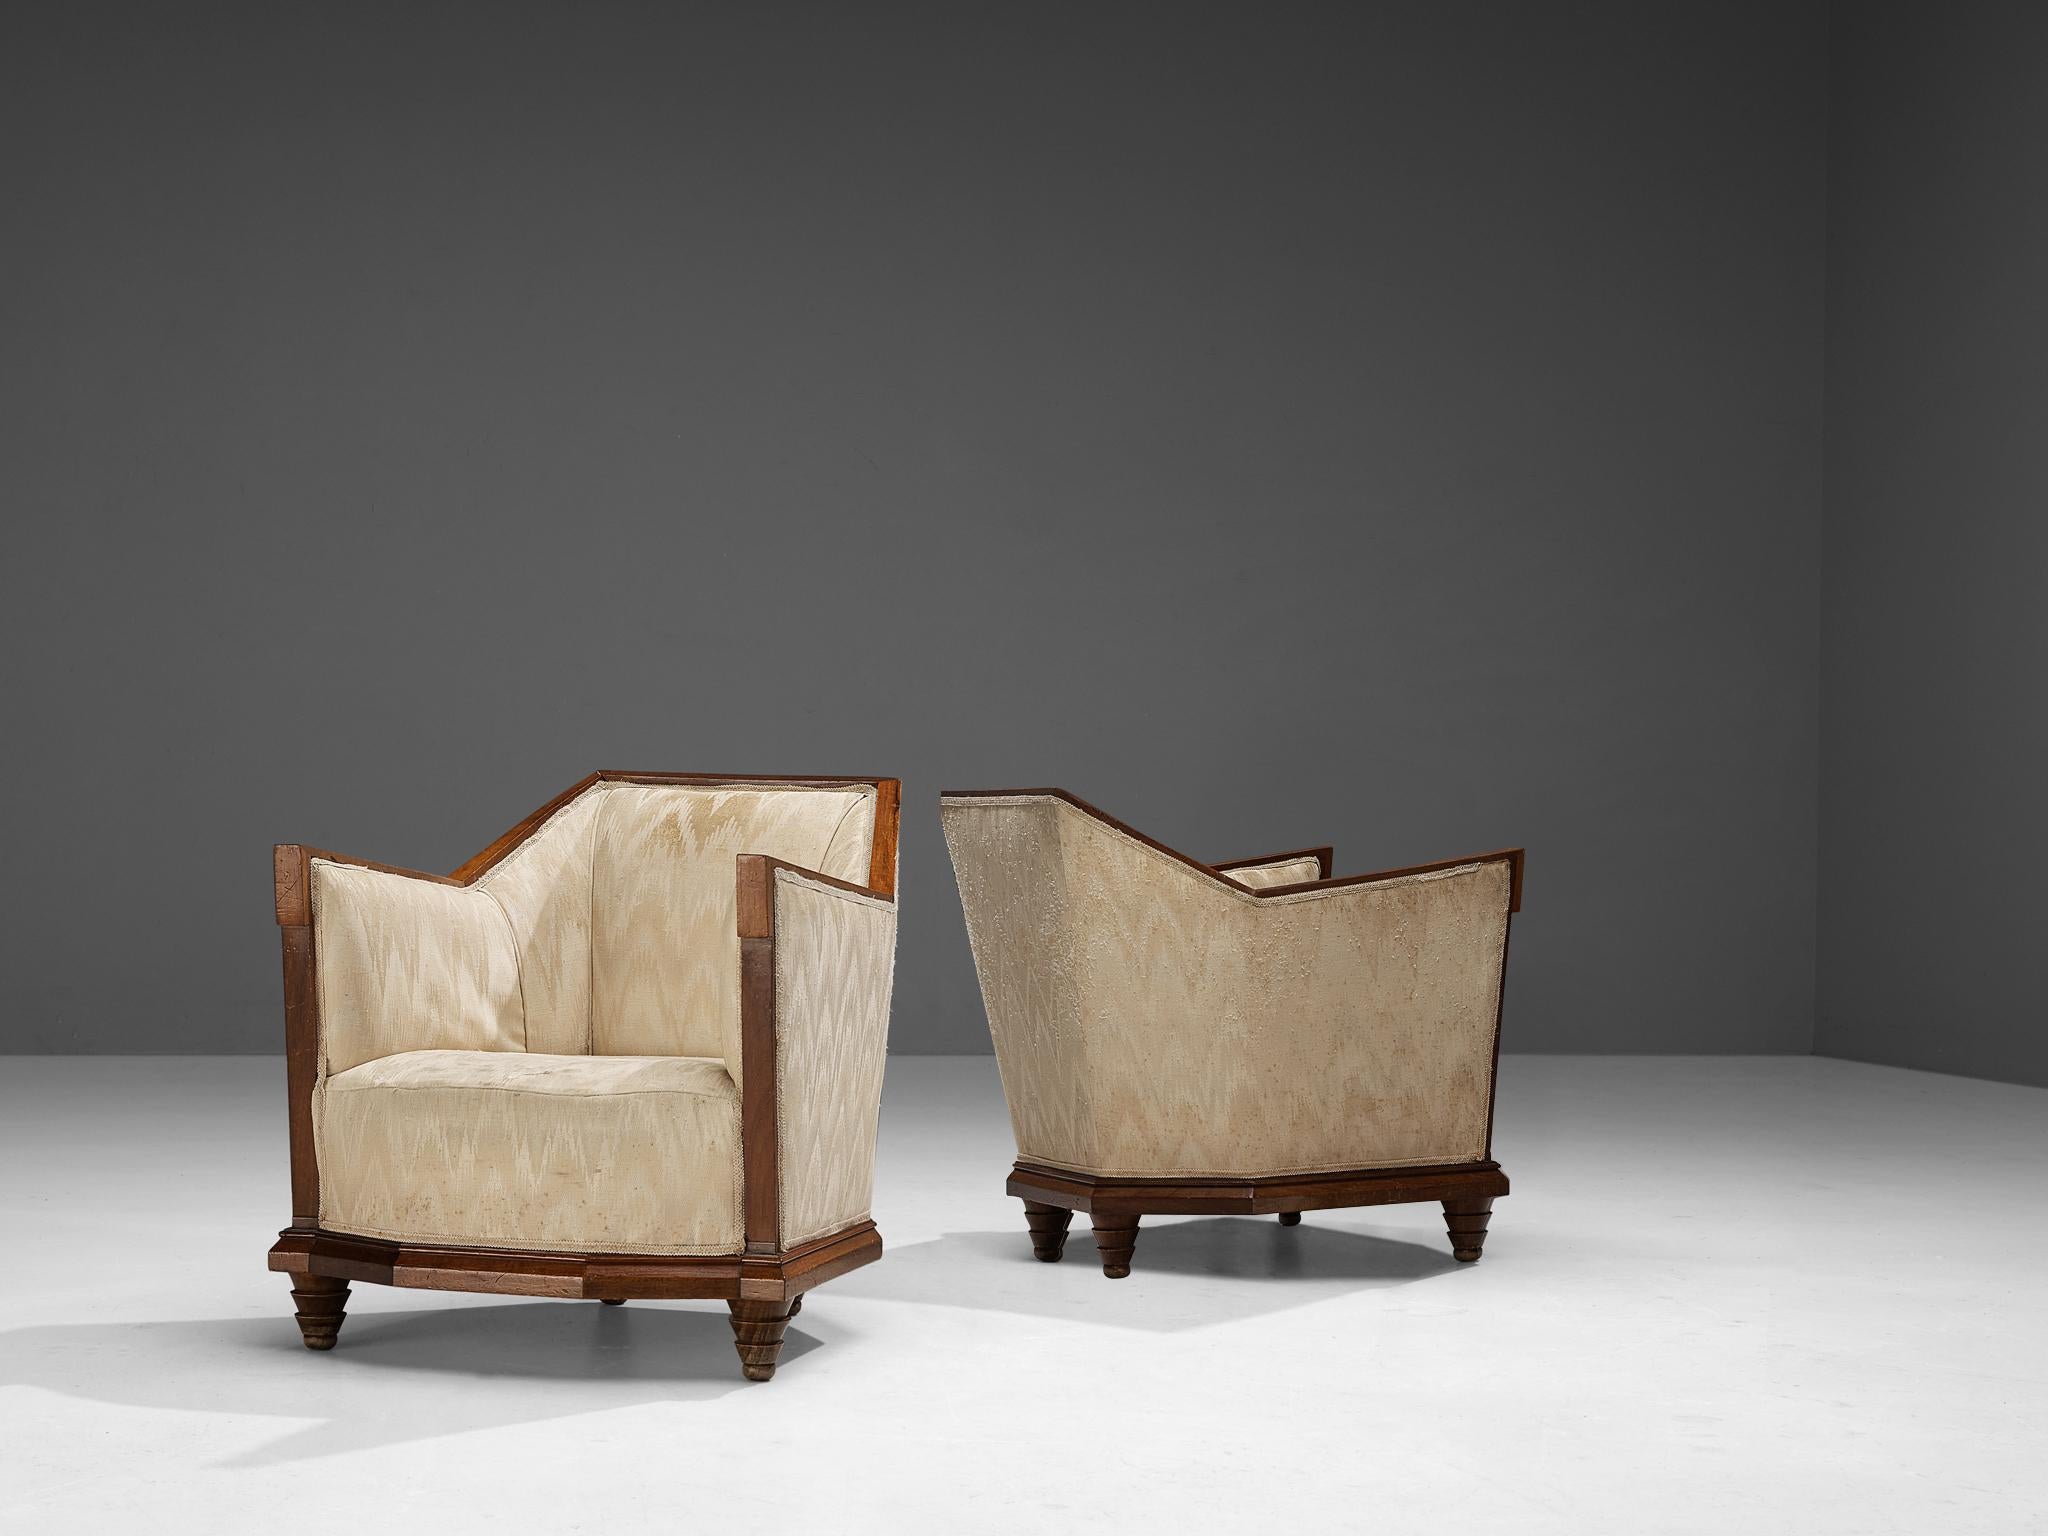 Pair of lounge chairs, walnut, fabric, Italy, 1930s/1940s

A magnificent pair of strong and angular armchairs in walnut wood and upholstered in a cream silk fabric in a subtle triangular pattern, a typical choice for furniture that were made in the